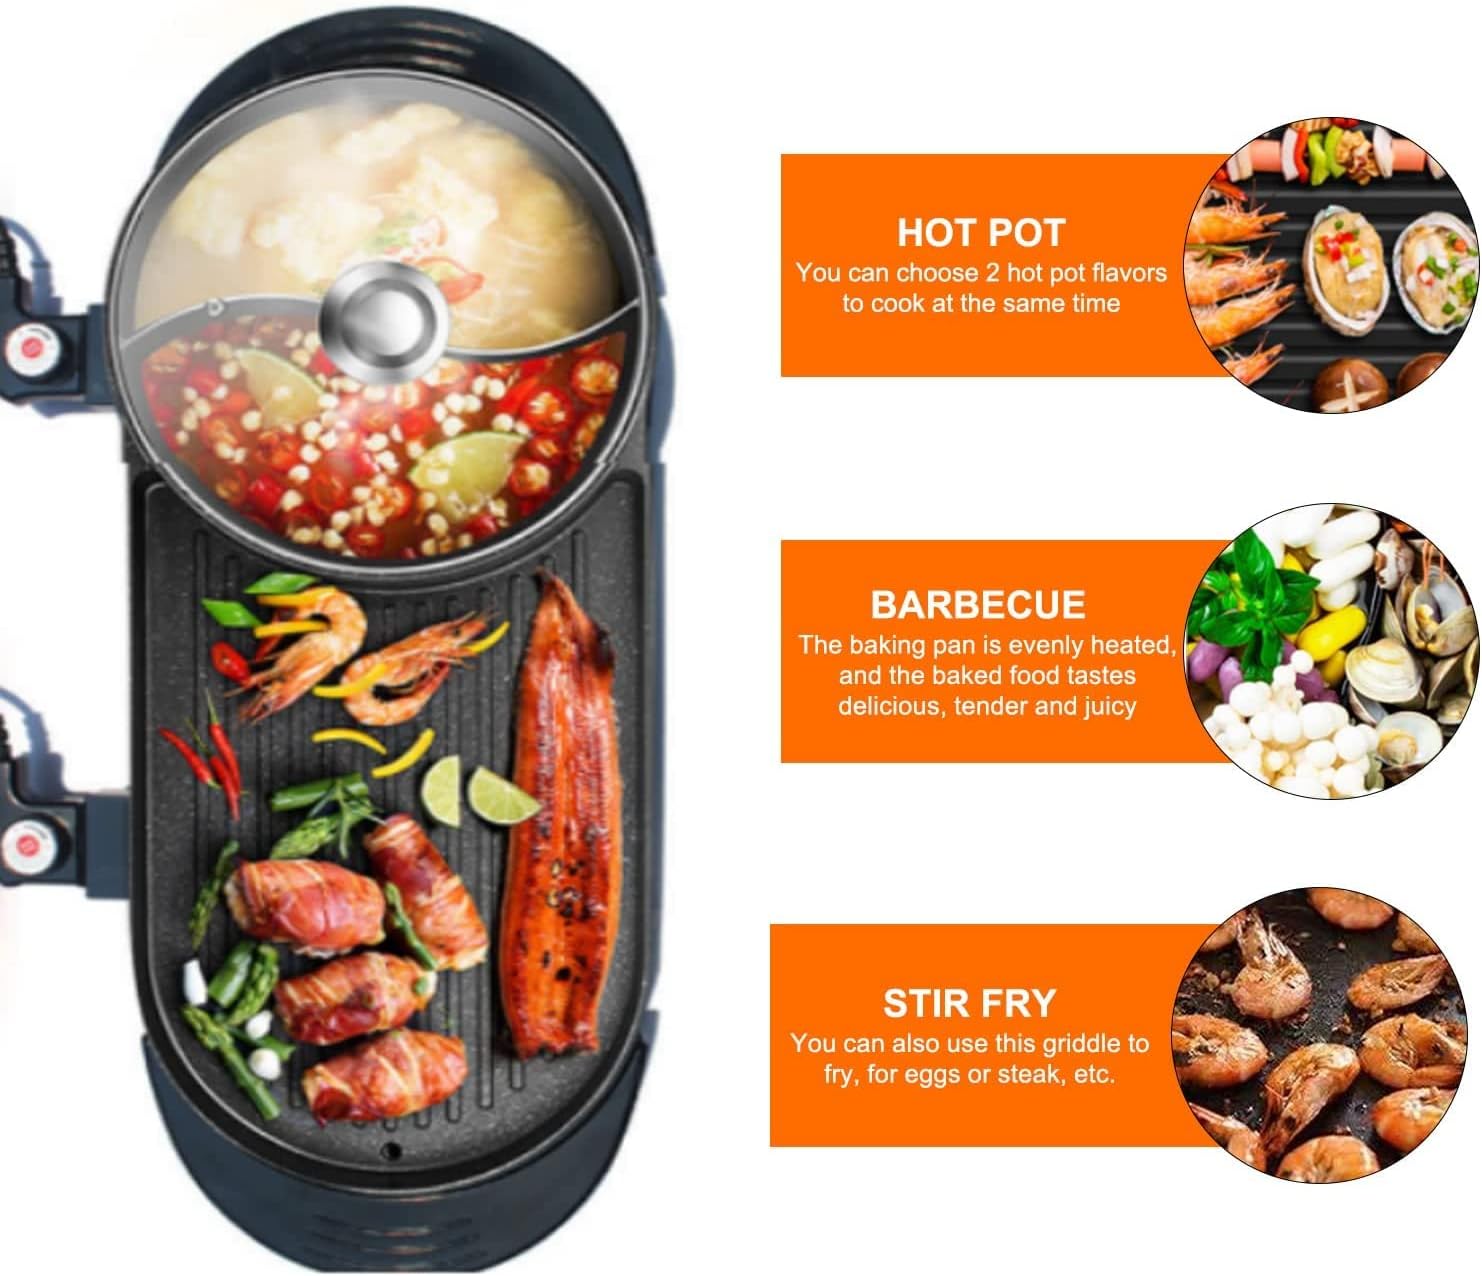 Hot pot with Grill 2 in 1 Electric BBQ Grill Shabupot 2200W Non-Stick Korean Barbecue Grill Indoor for 2-12 People Independent Dual Temperature Control 110V(27 Inch) - Hot Pot With Grill 2 In 1 Electric BBQ Grill Shabupot Review